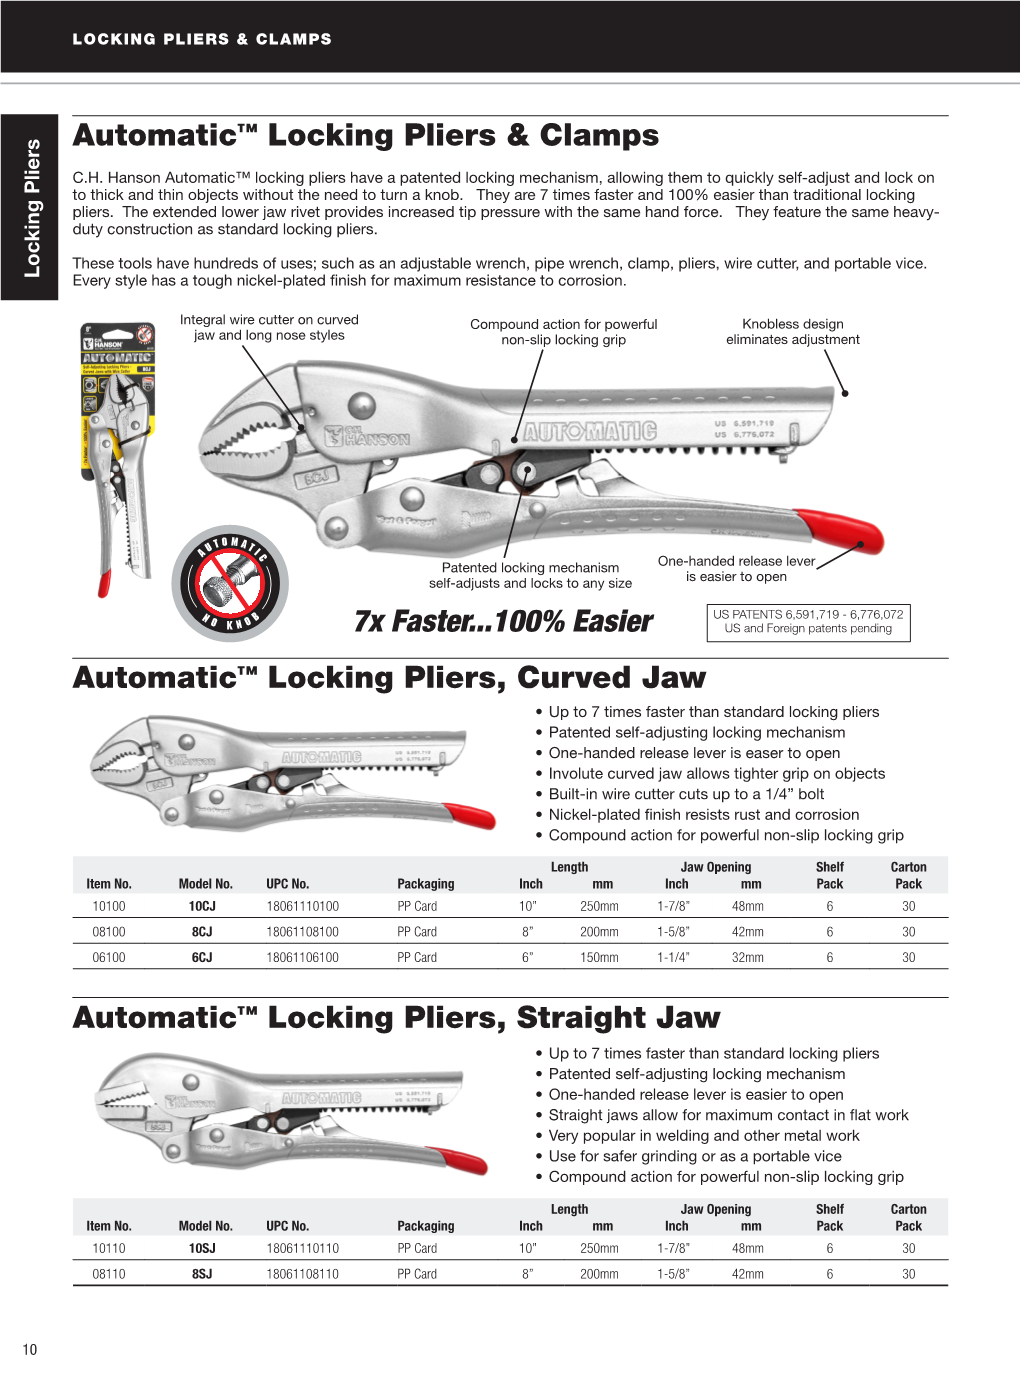 Automatic™ Locking Pliers & Clamps